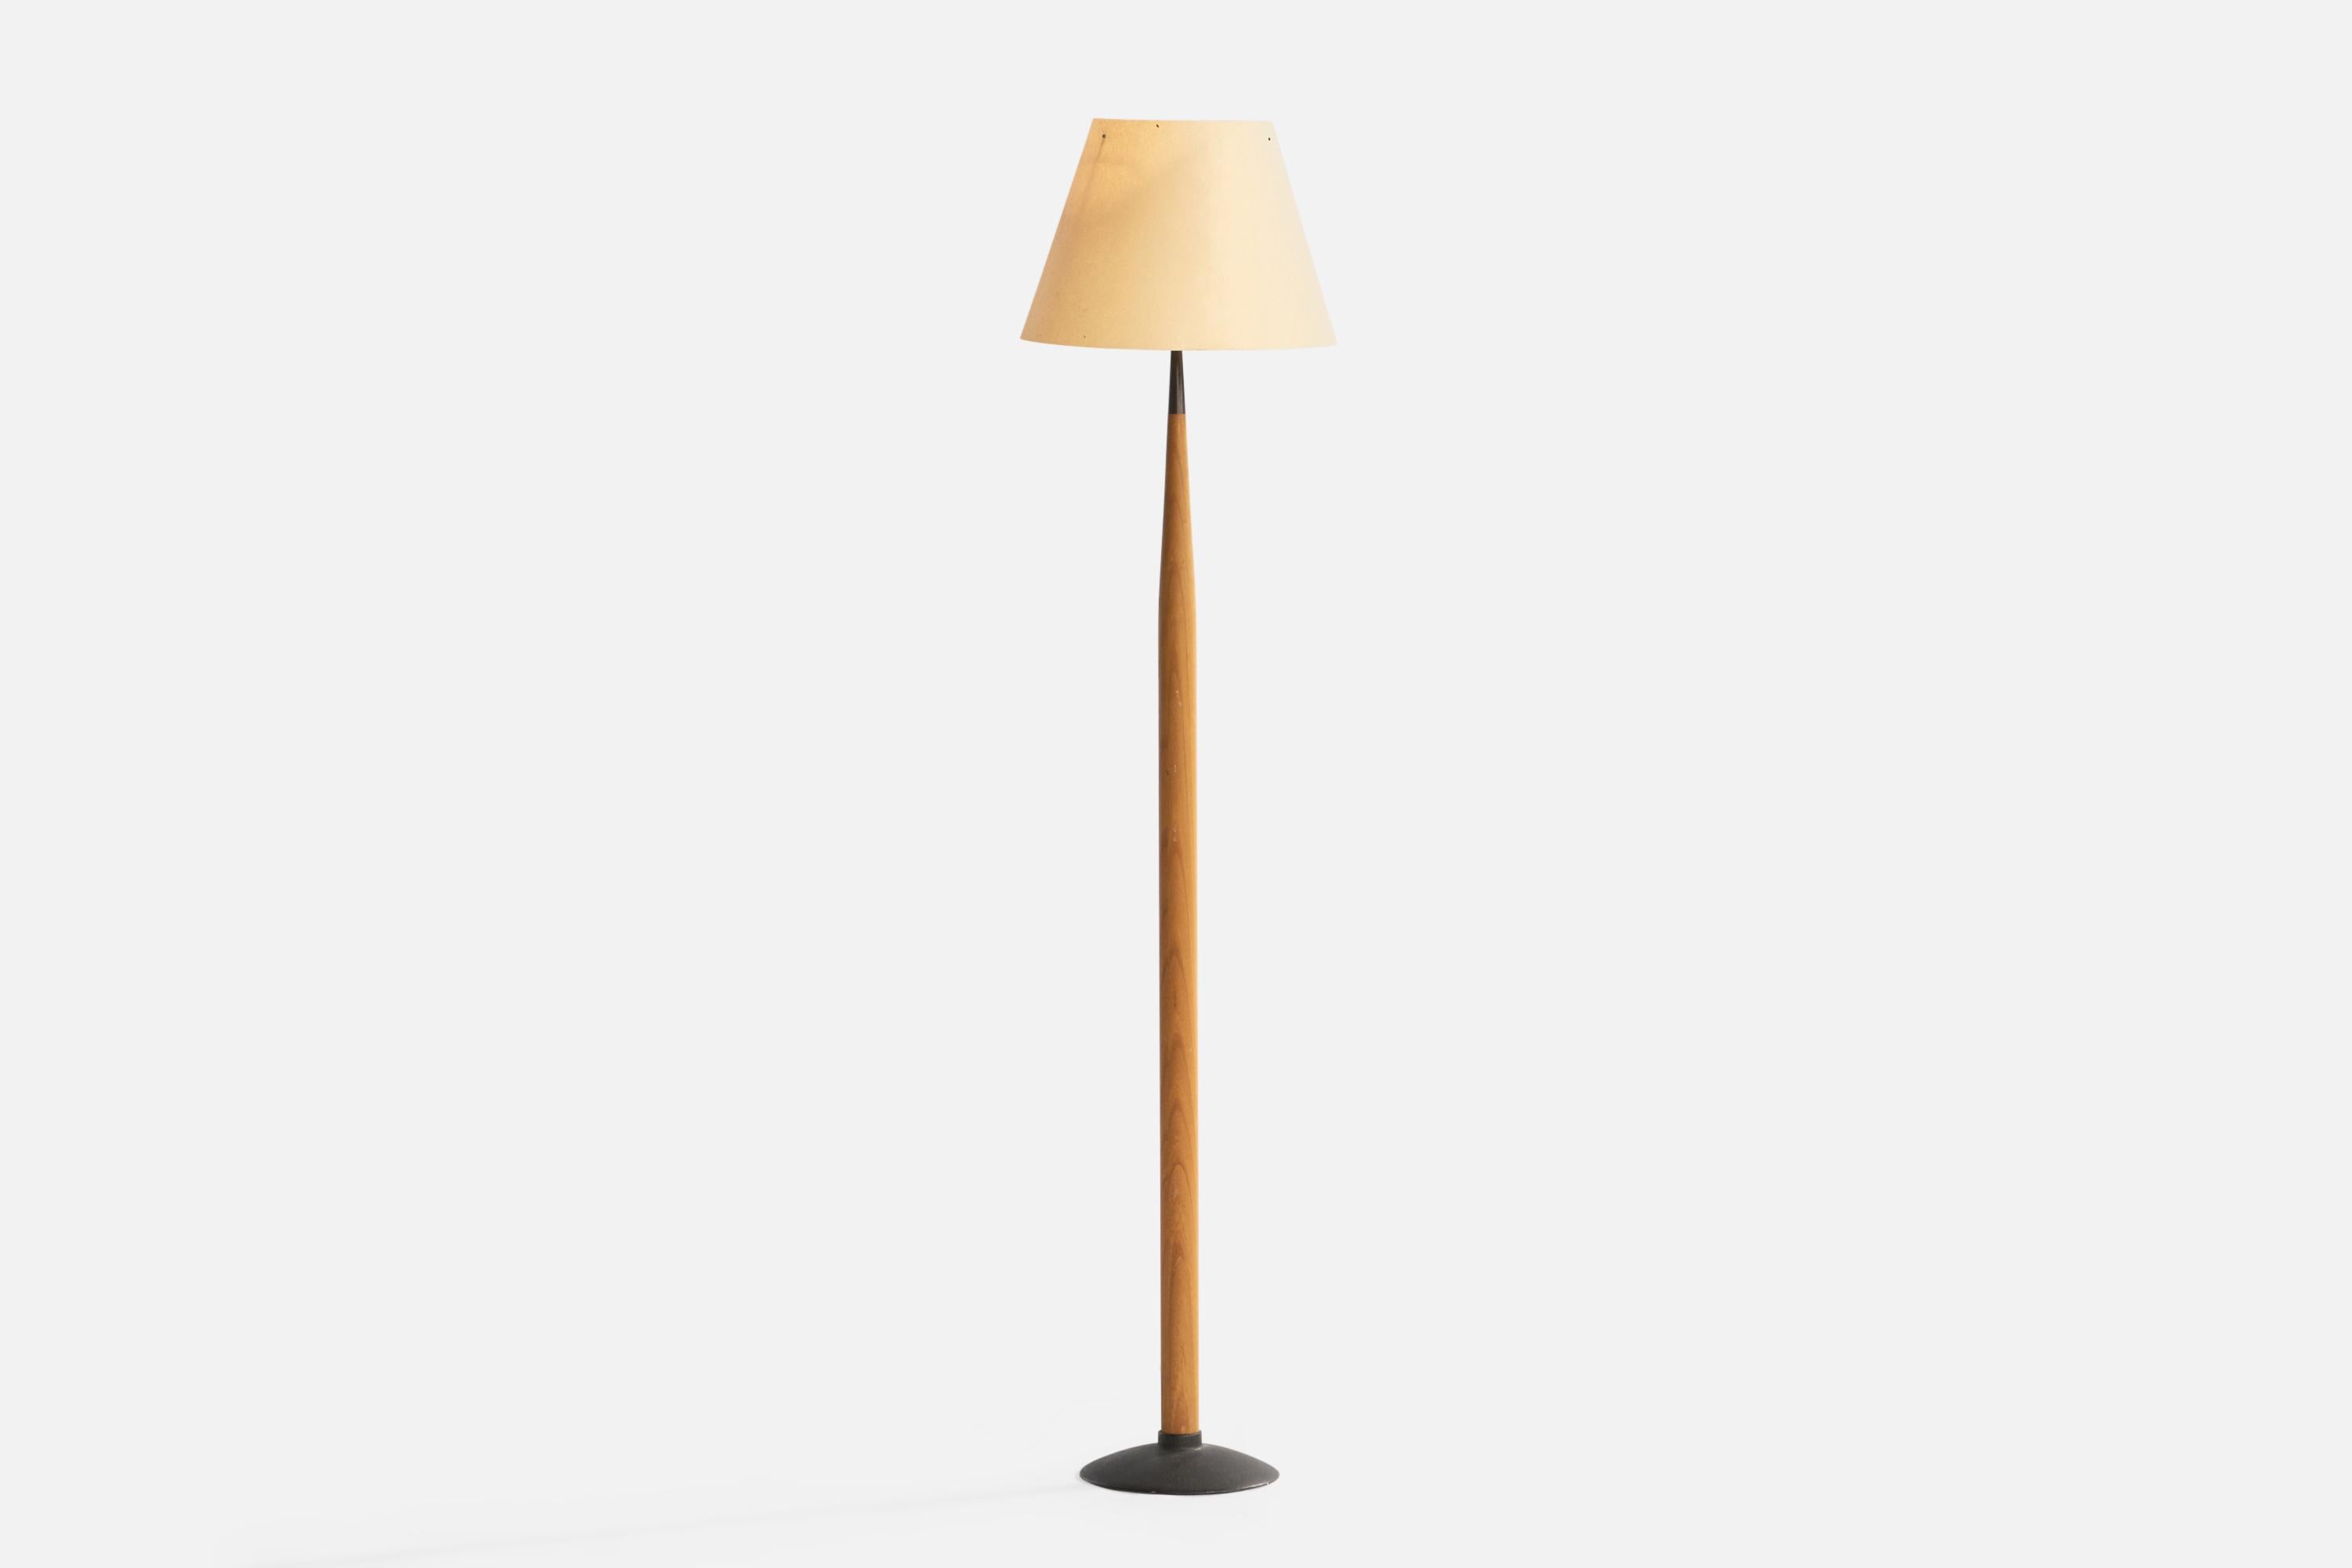 An oak, black-lacquered metal and paper floor lamp designed and produced by Lars Bessfelt, Anderslöf, Sweden, 1980s.

Overall Dimensions (inches): 52” H x 12” Diameter. Stated dimensions include shade.
Bulb Specifications: E-26 Bulb
Number of